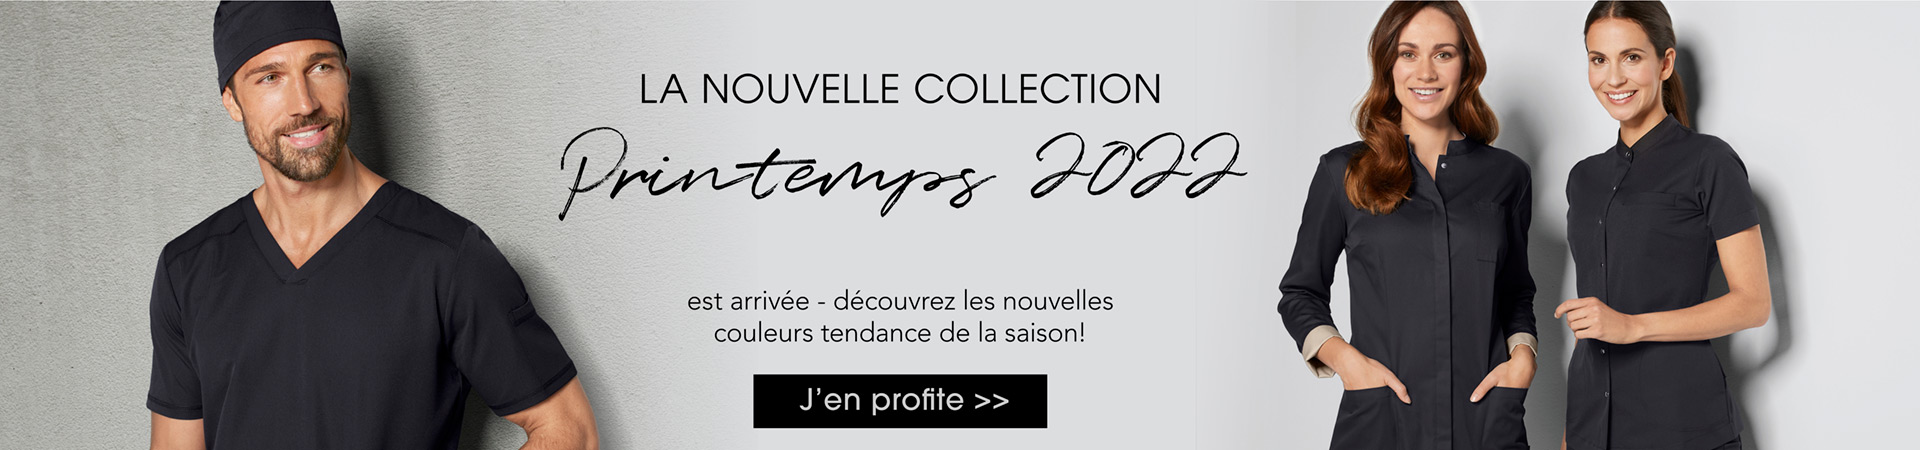 7days - Nouvelle collection